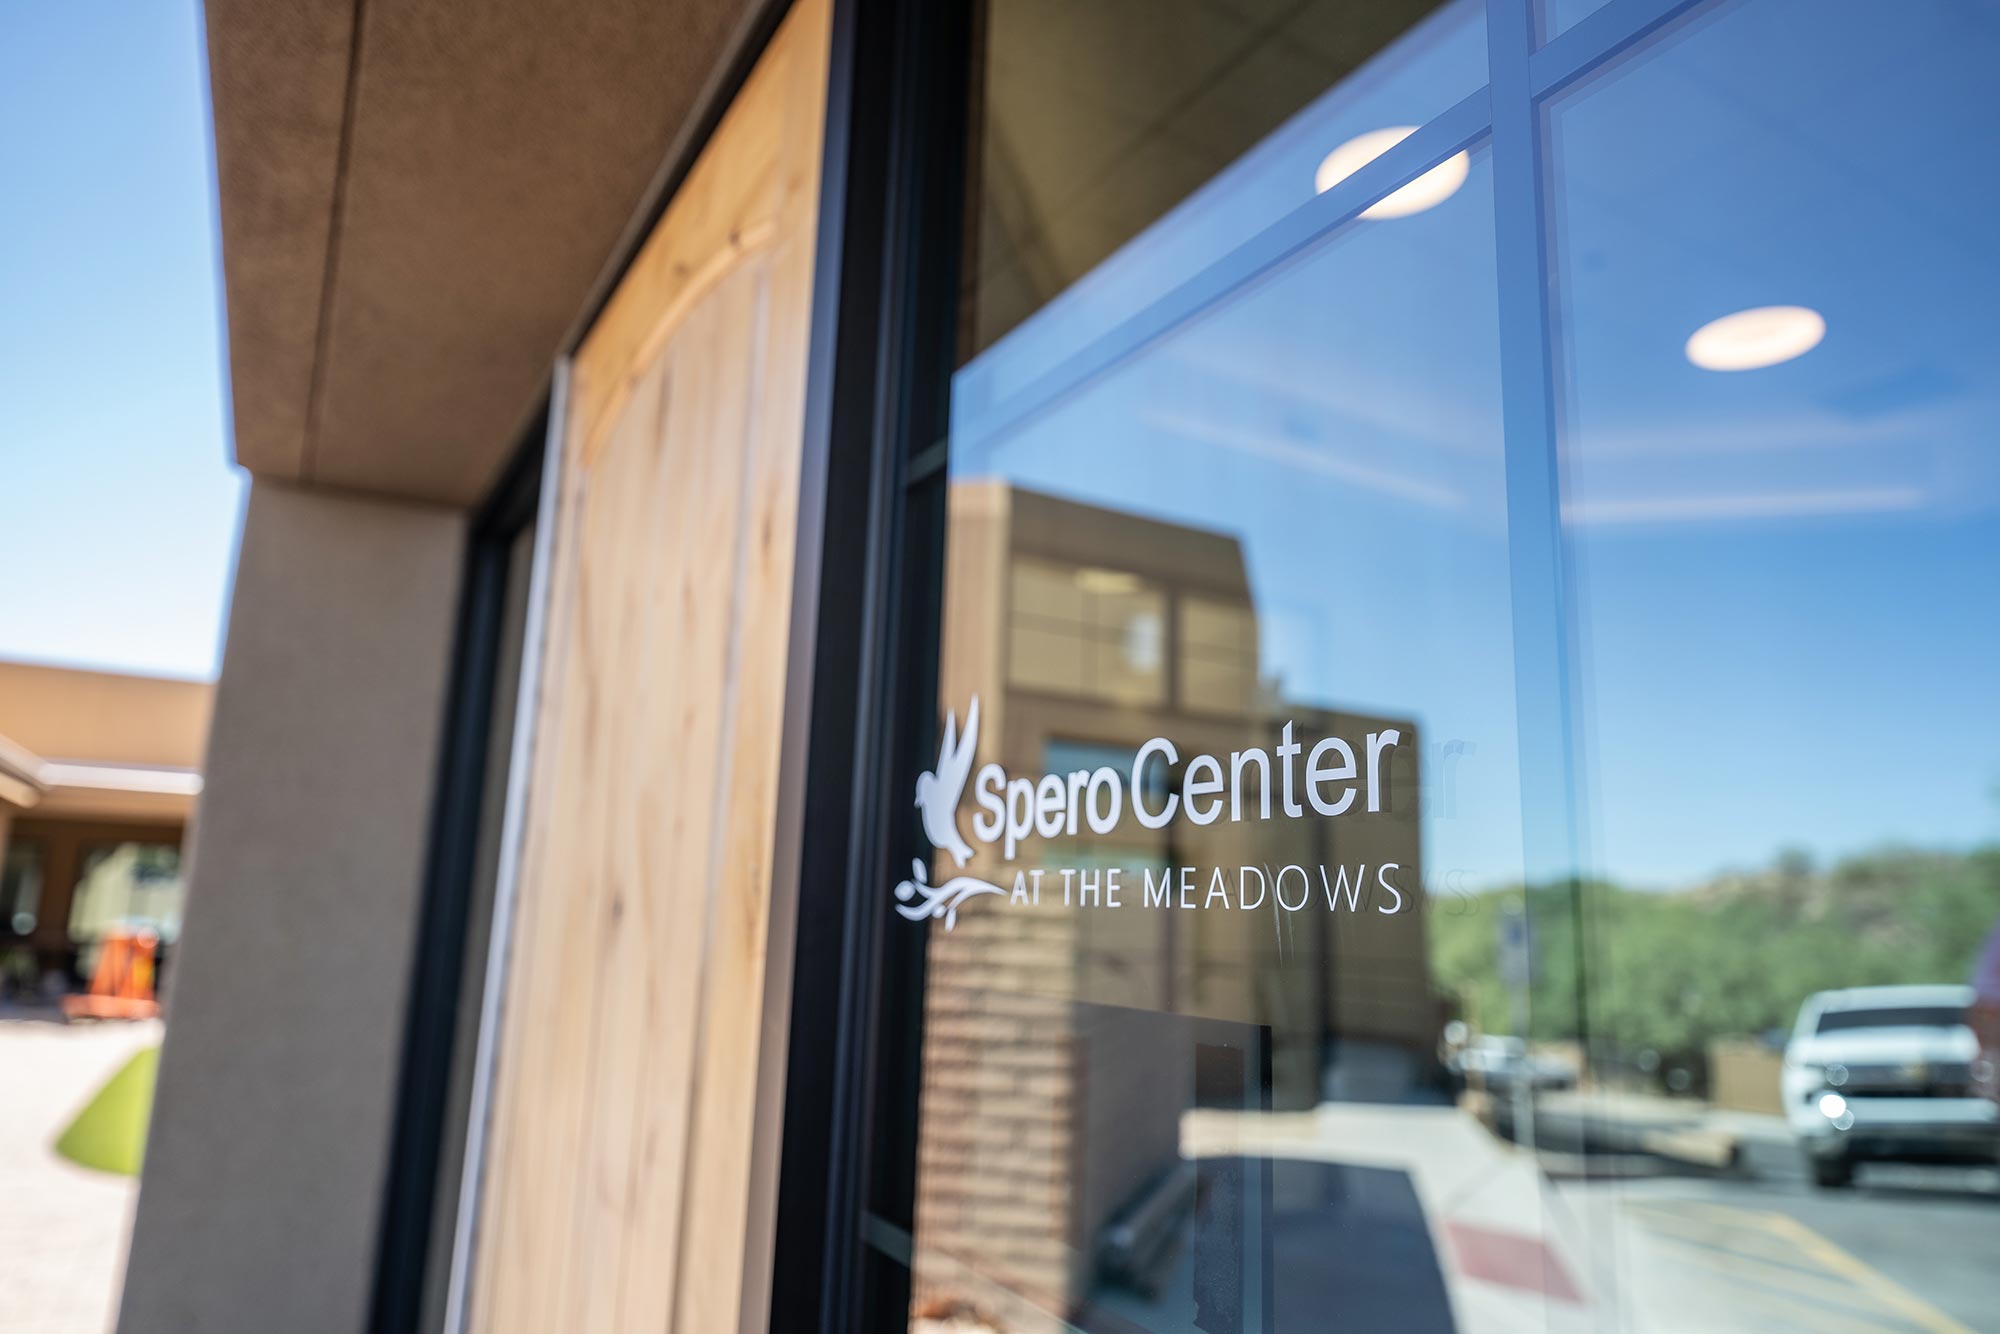 The Spero Center at The Meadows